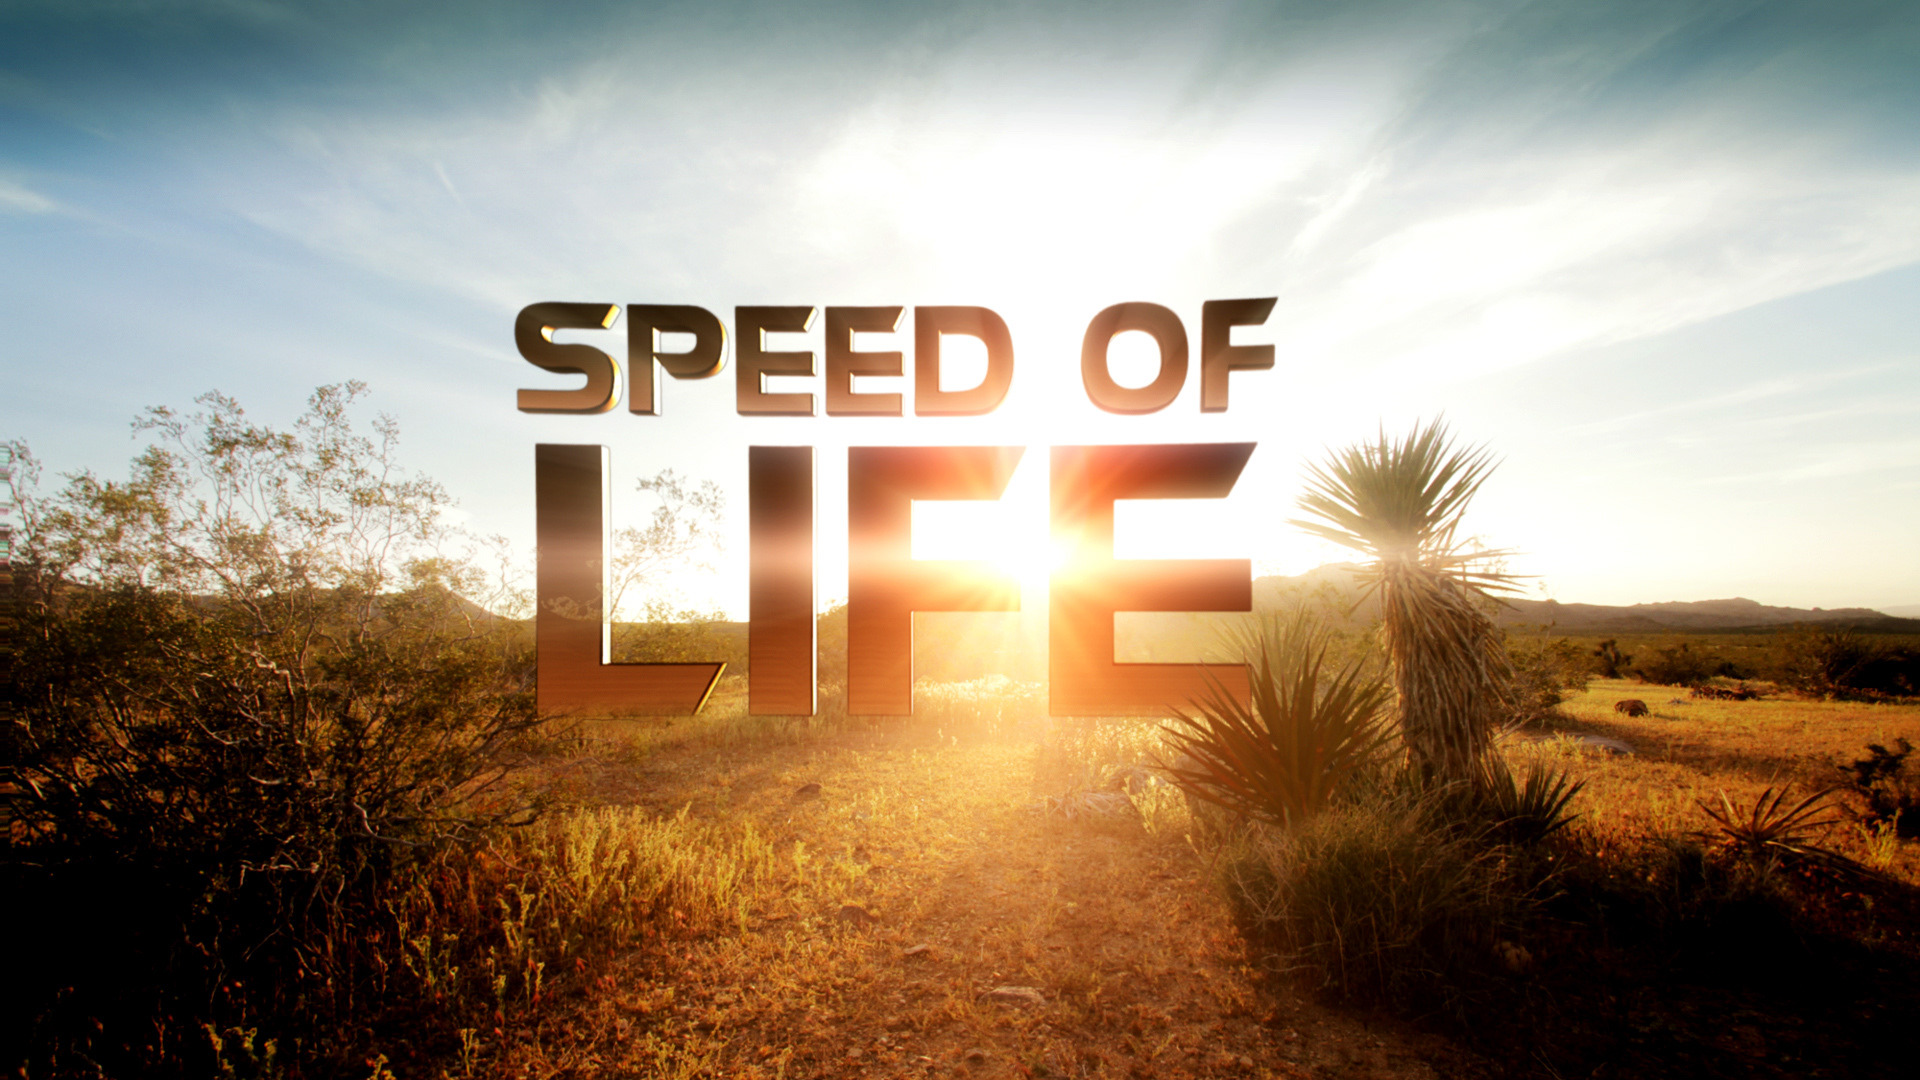 Show Speed of Life